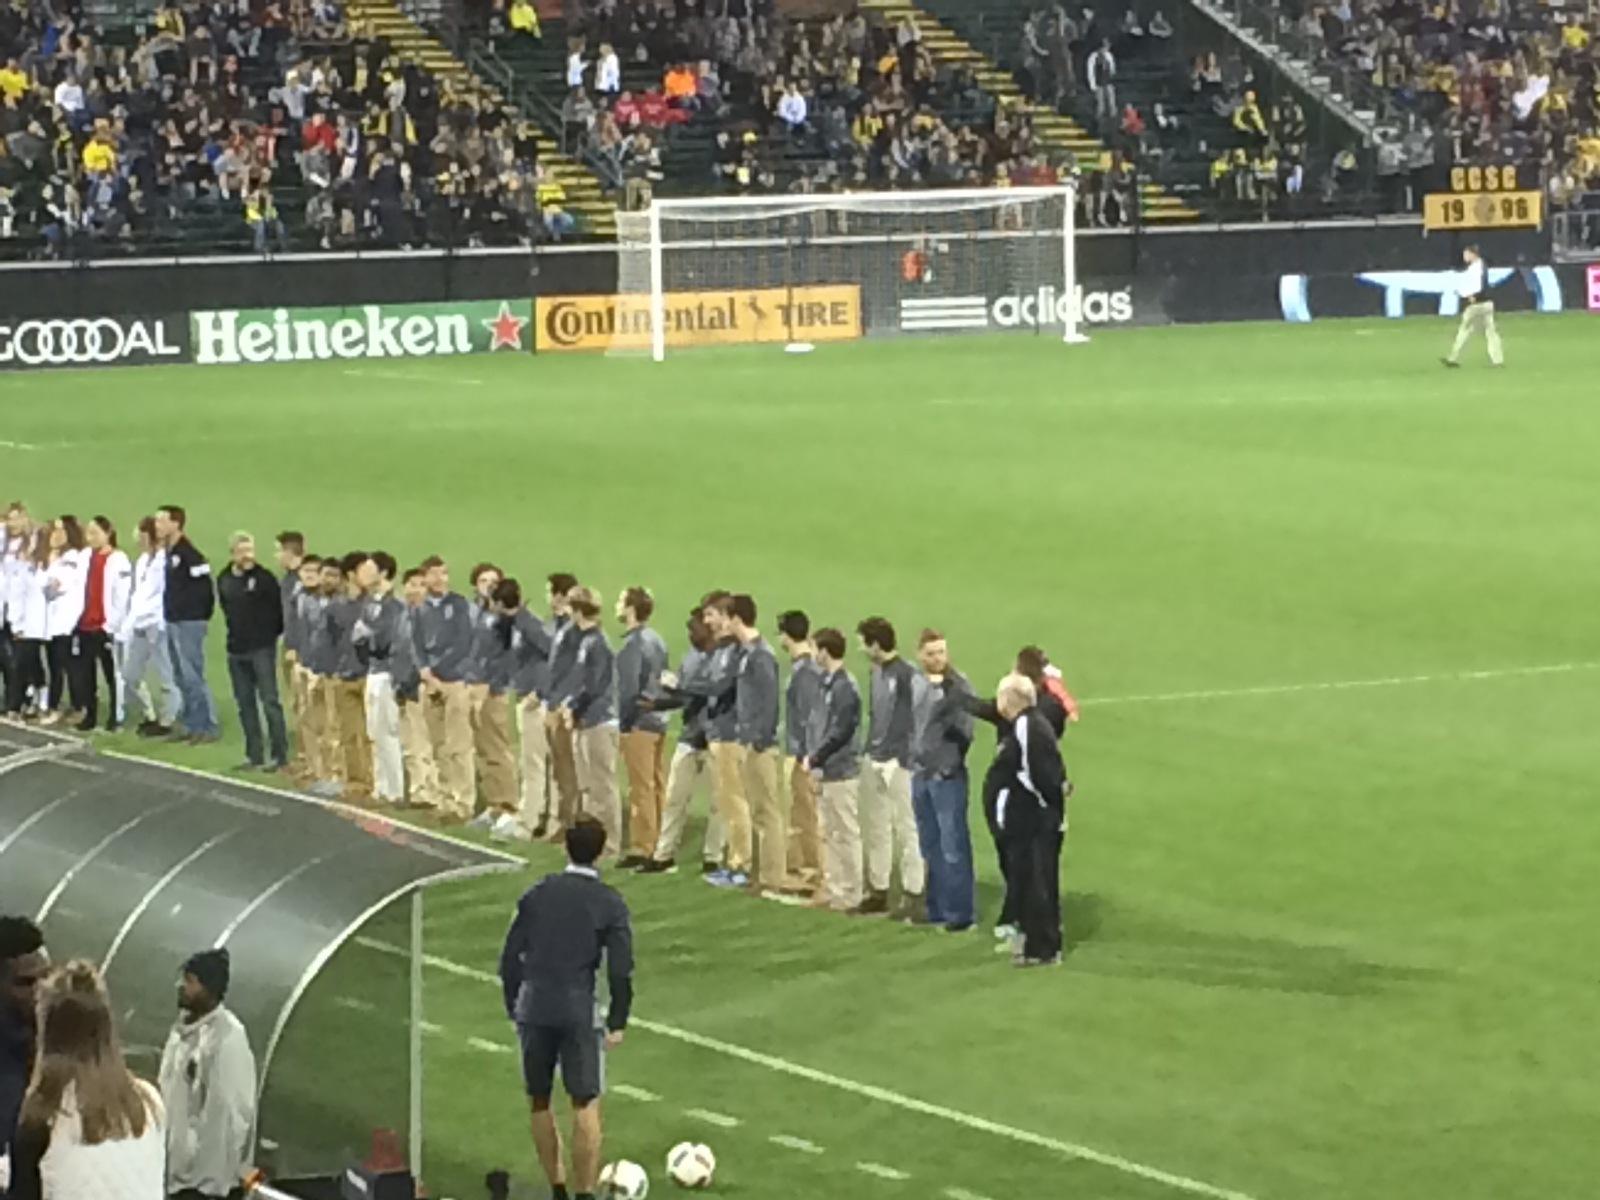 Recognition at the Columbus Crew Opener